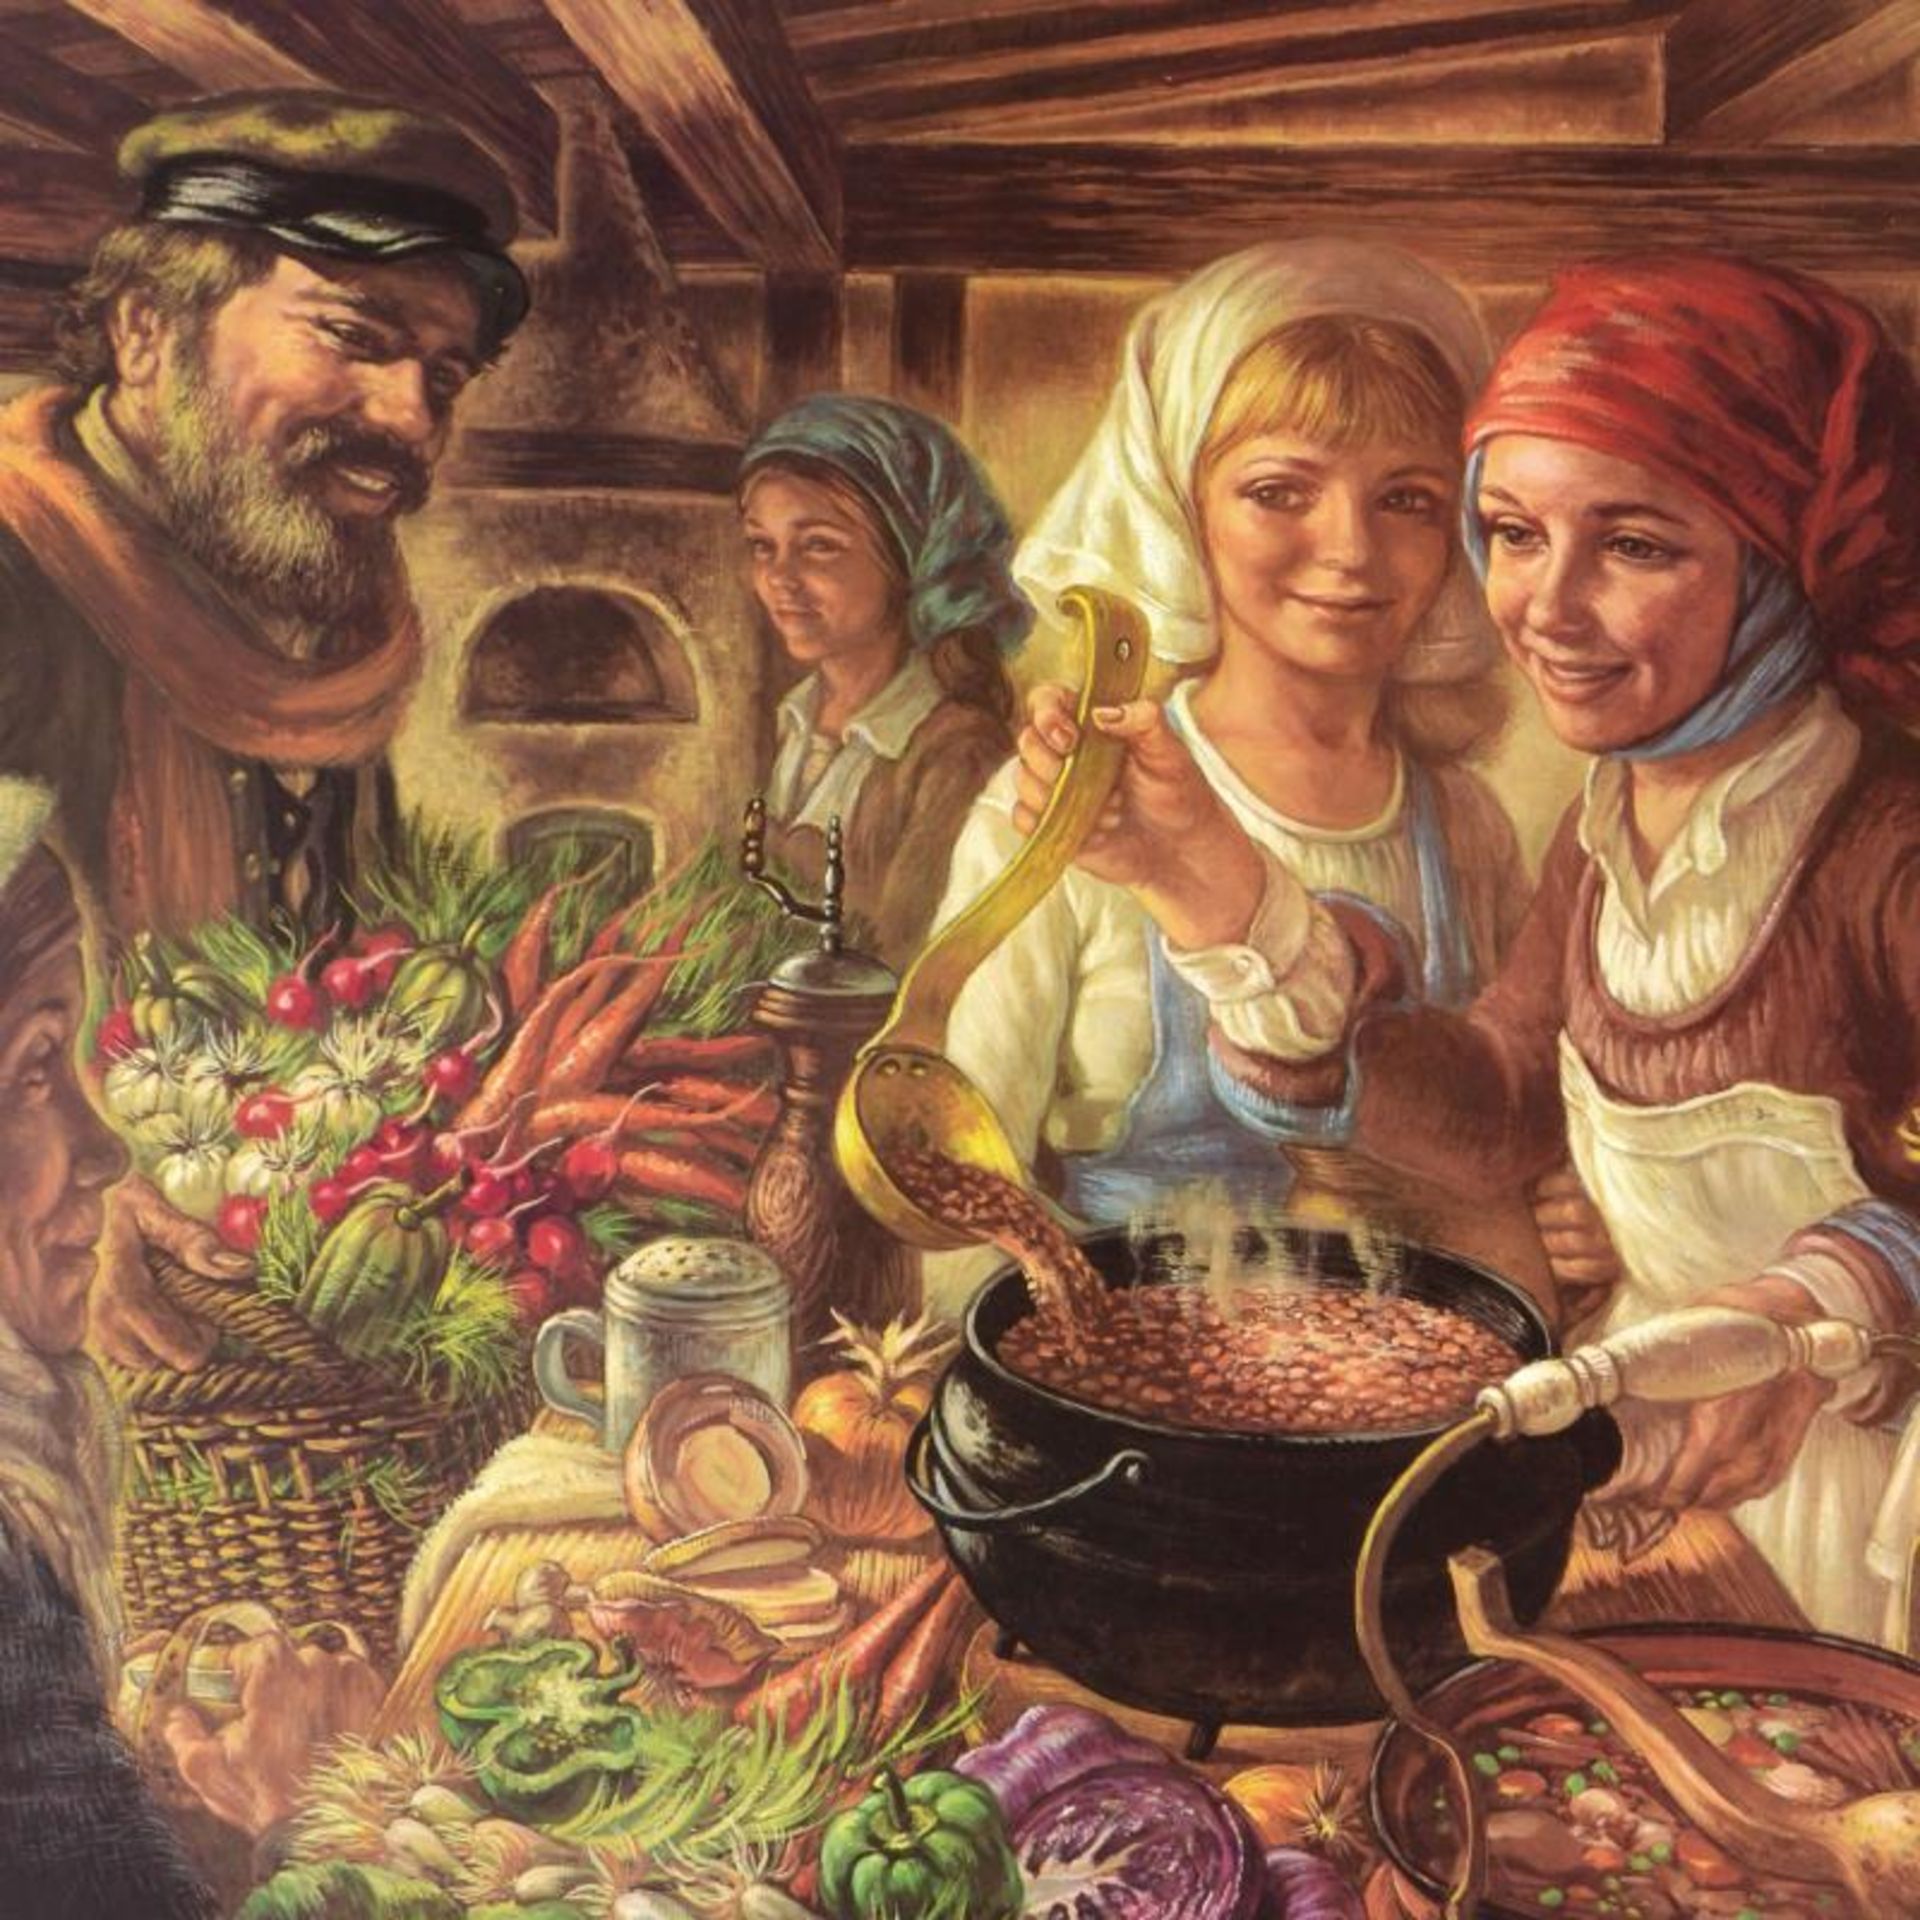 Making of the Cholent by Virginia Dan (1922-2014) - Image 2 of 2